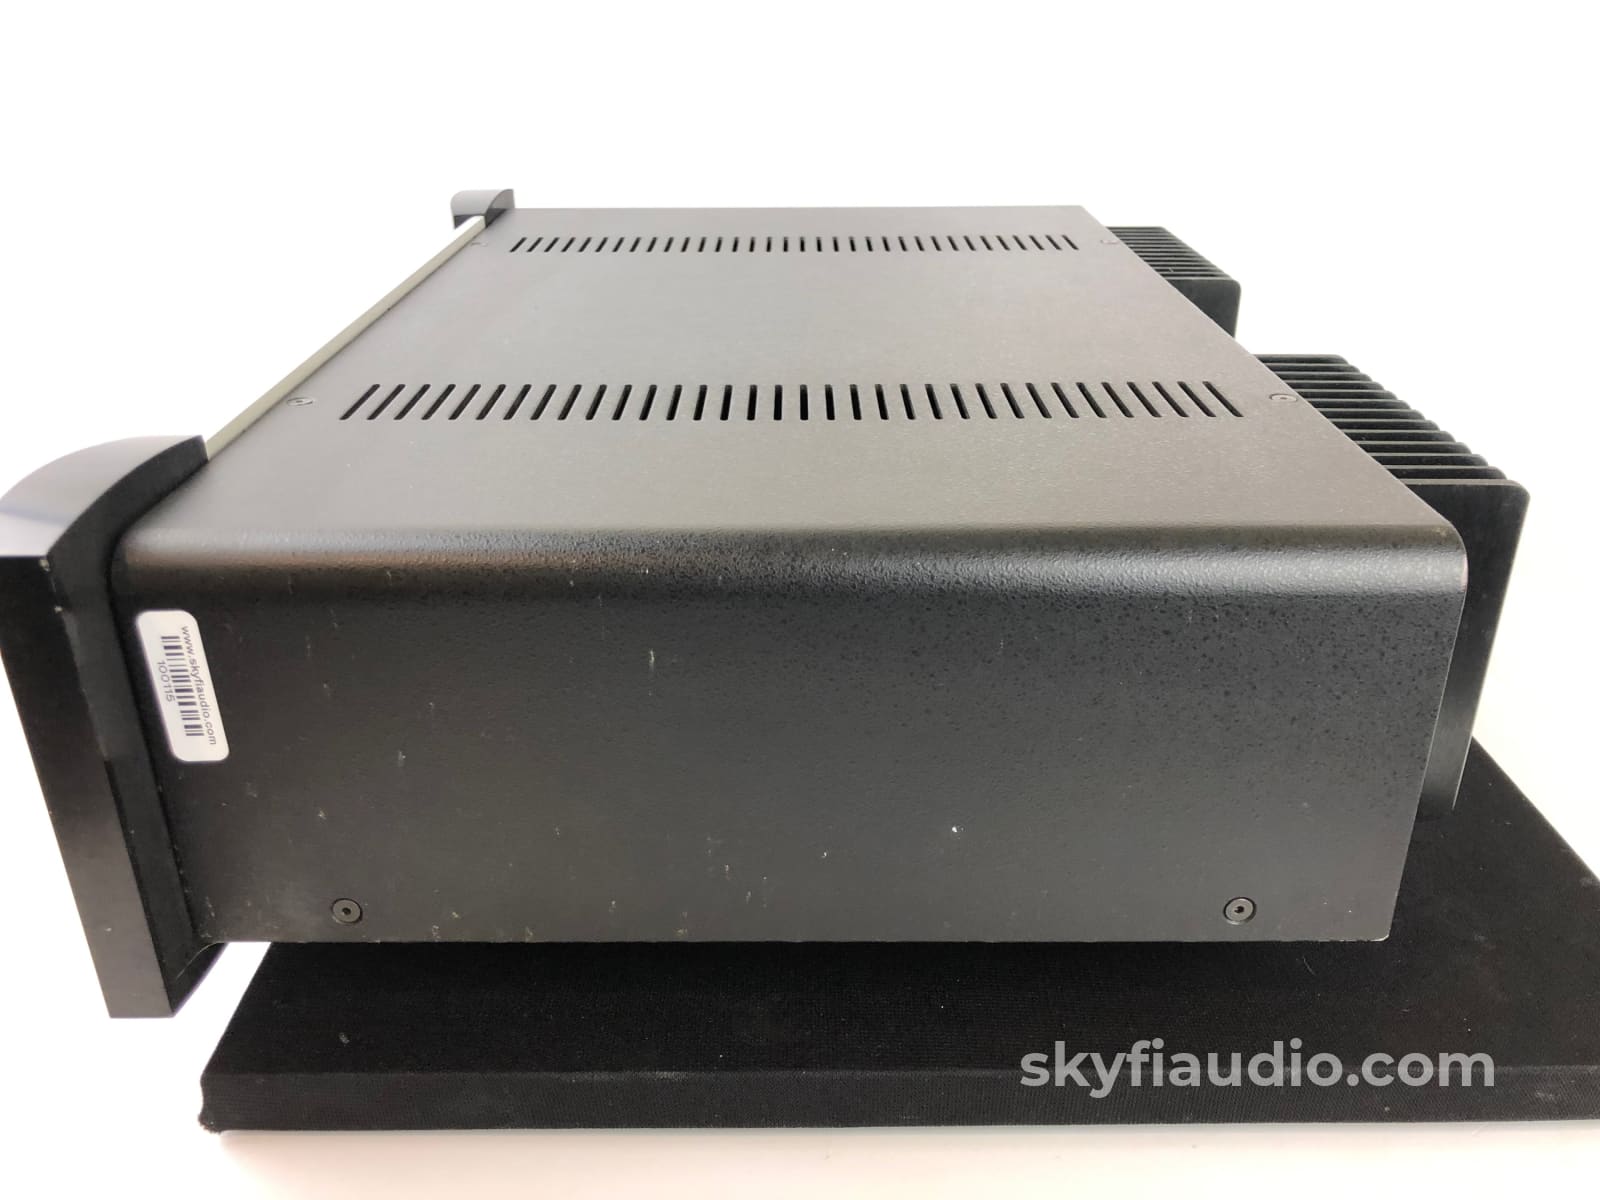 Classe Audio Ca-101 Solid State Amplifier In Two Tone Finish - Fully Tested (D)